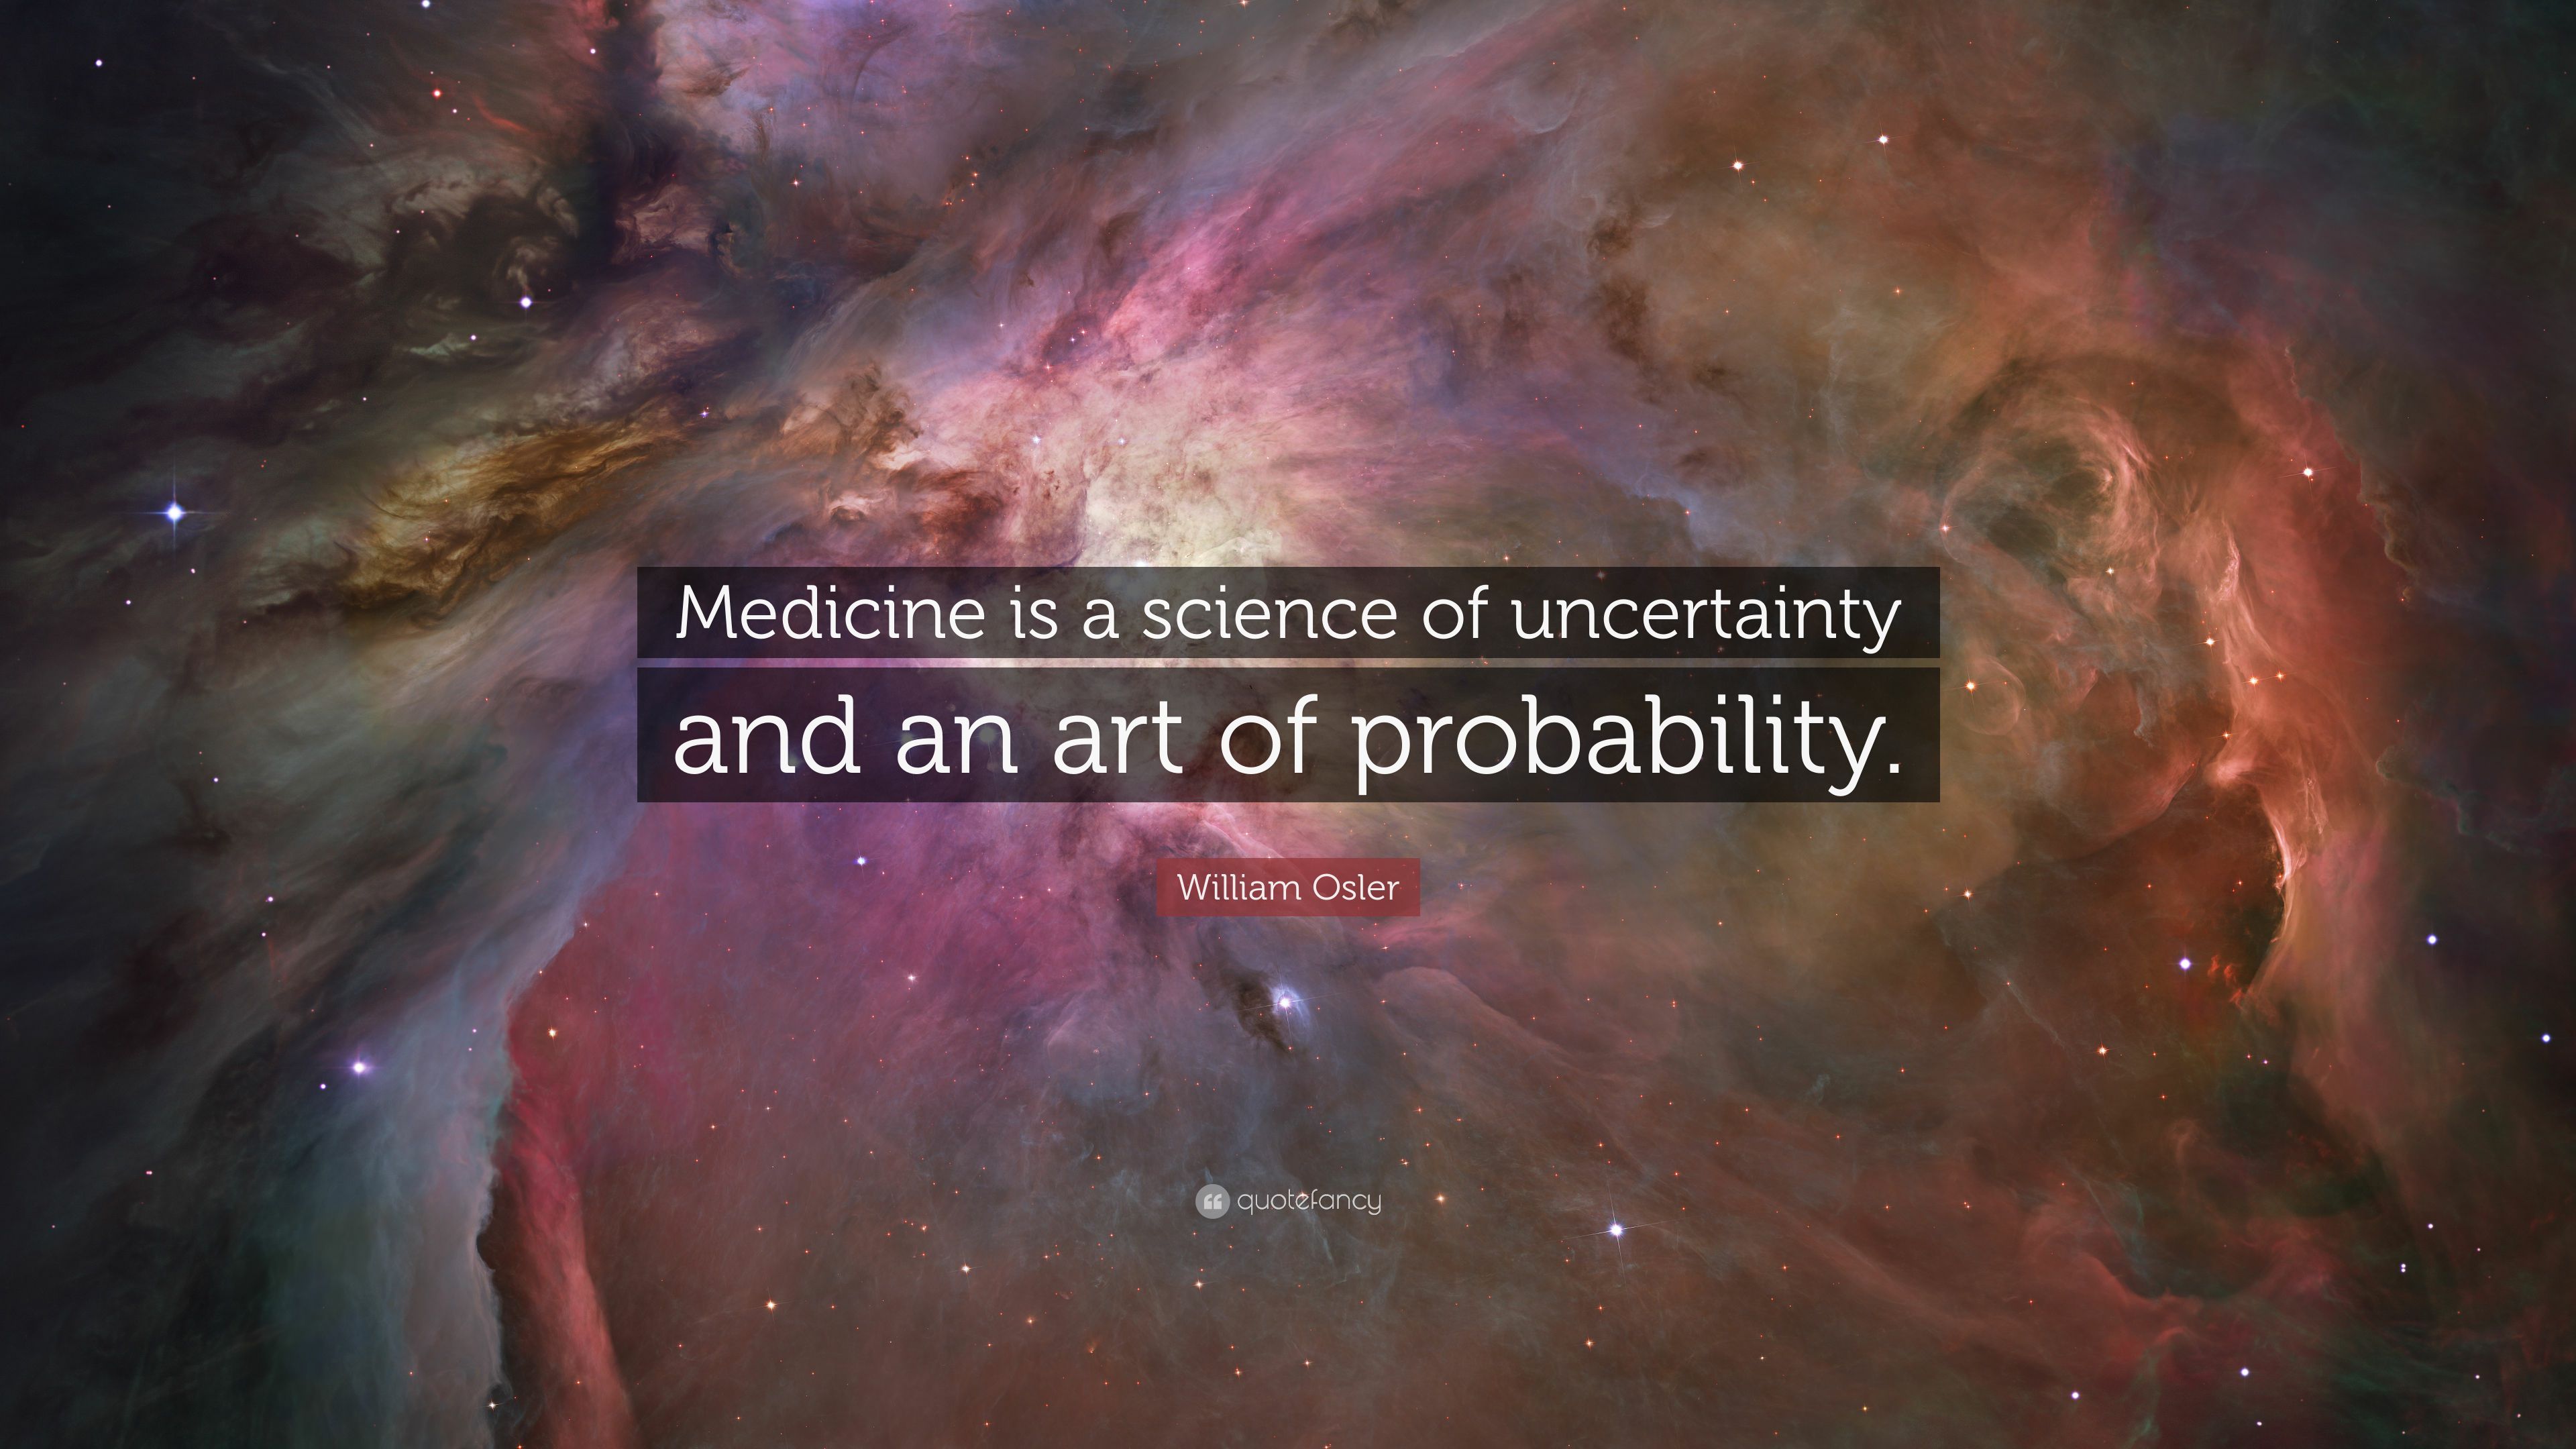 William Osler Quote: “Medicine is a science of uncertainty and an art of probability.” (7 wallpaper)